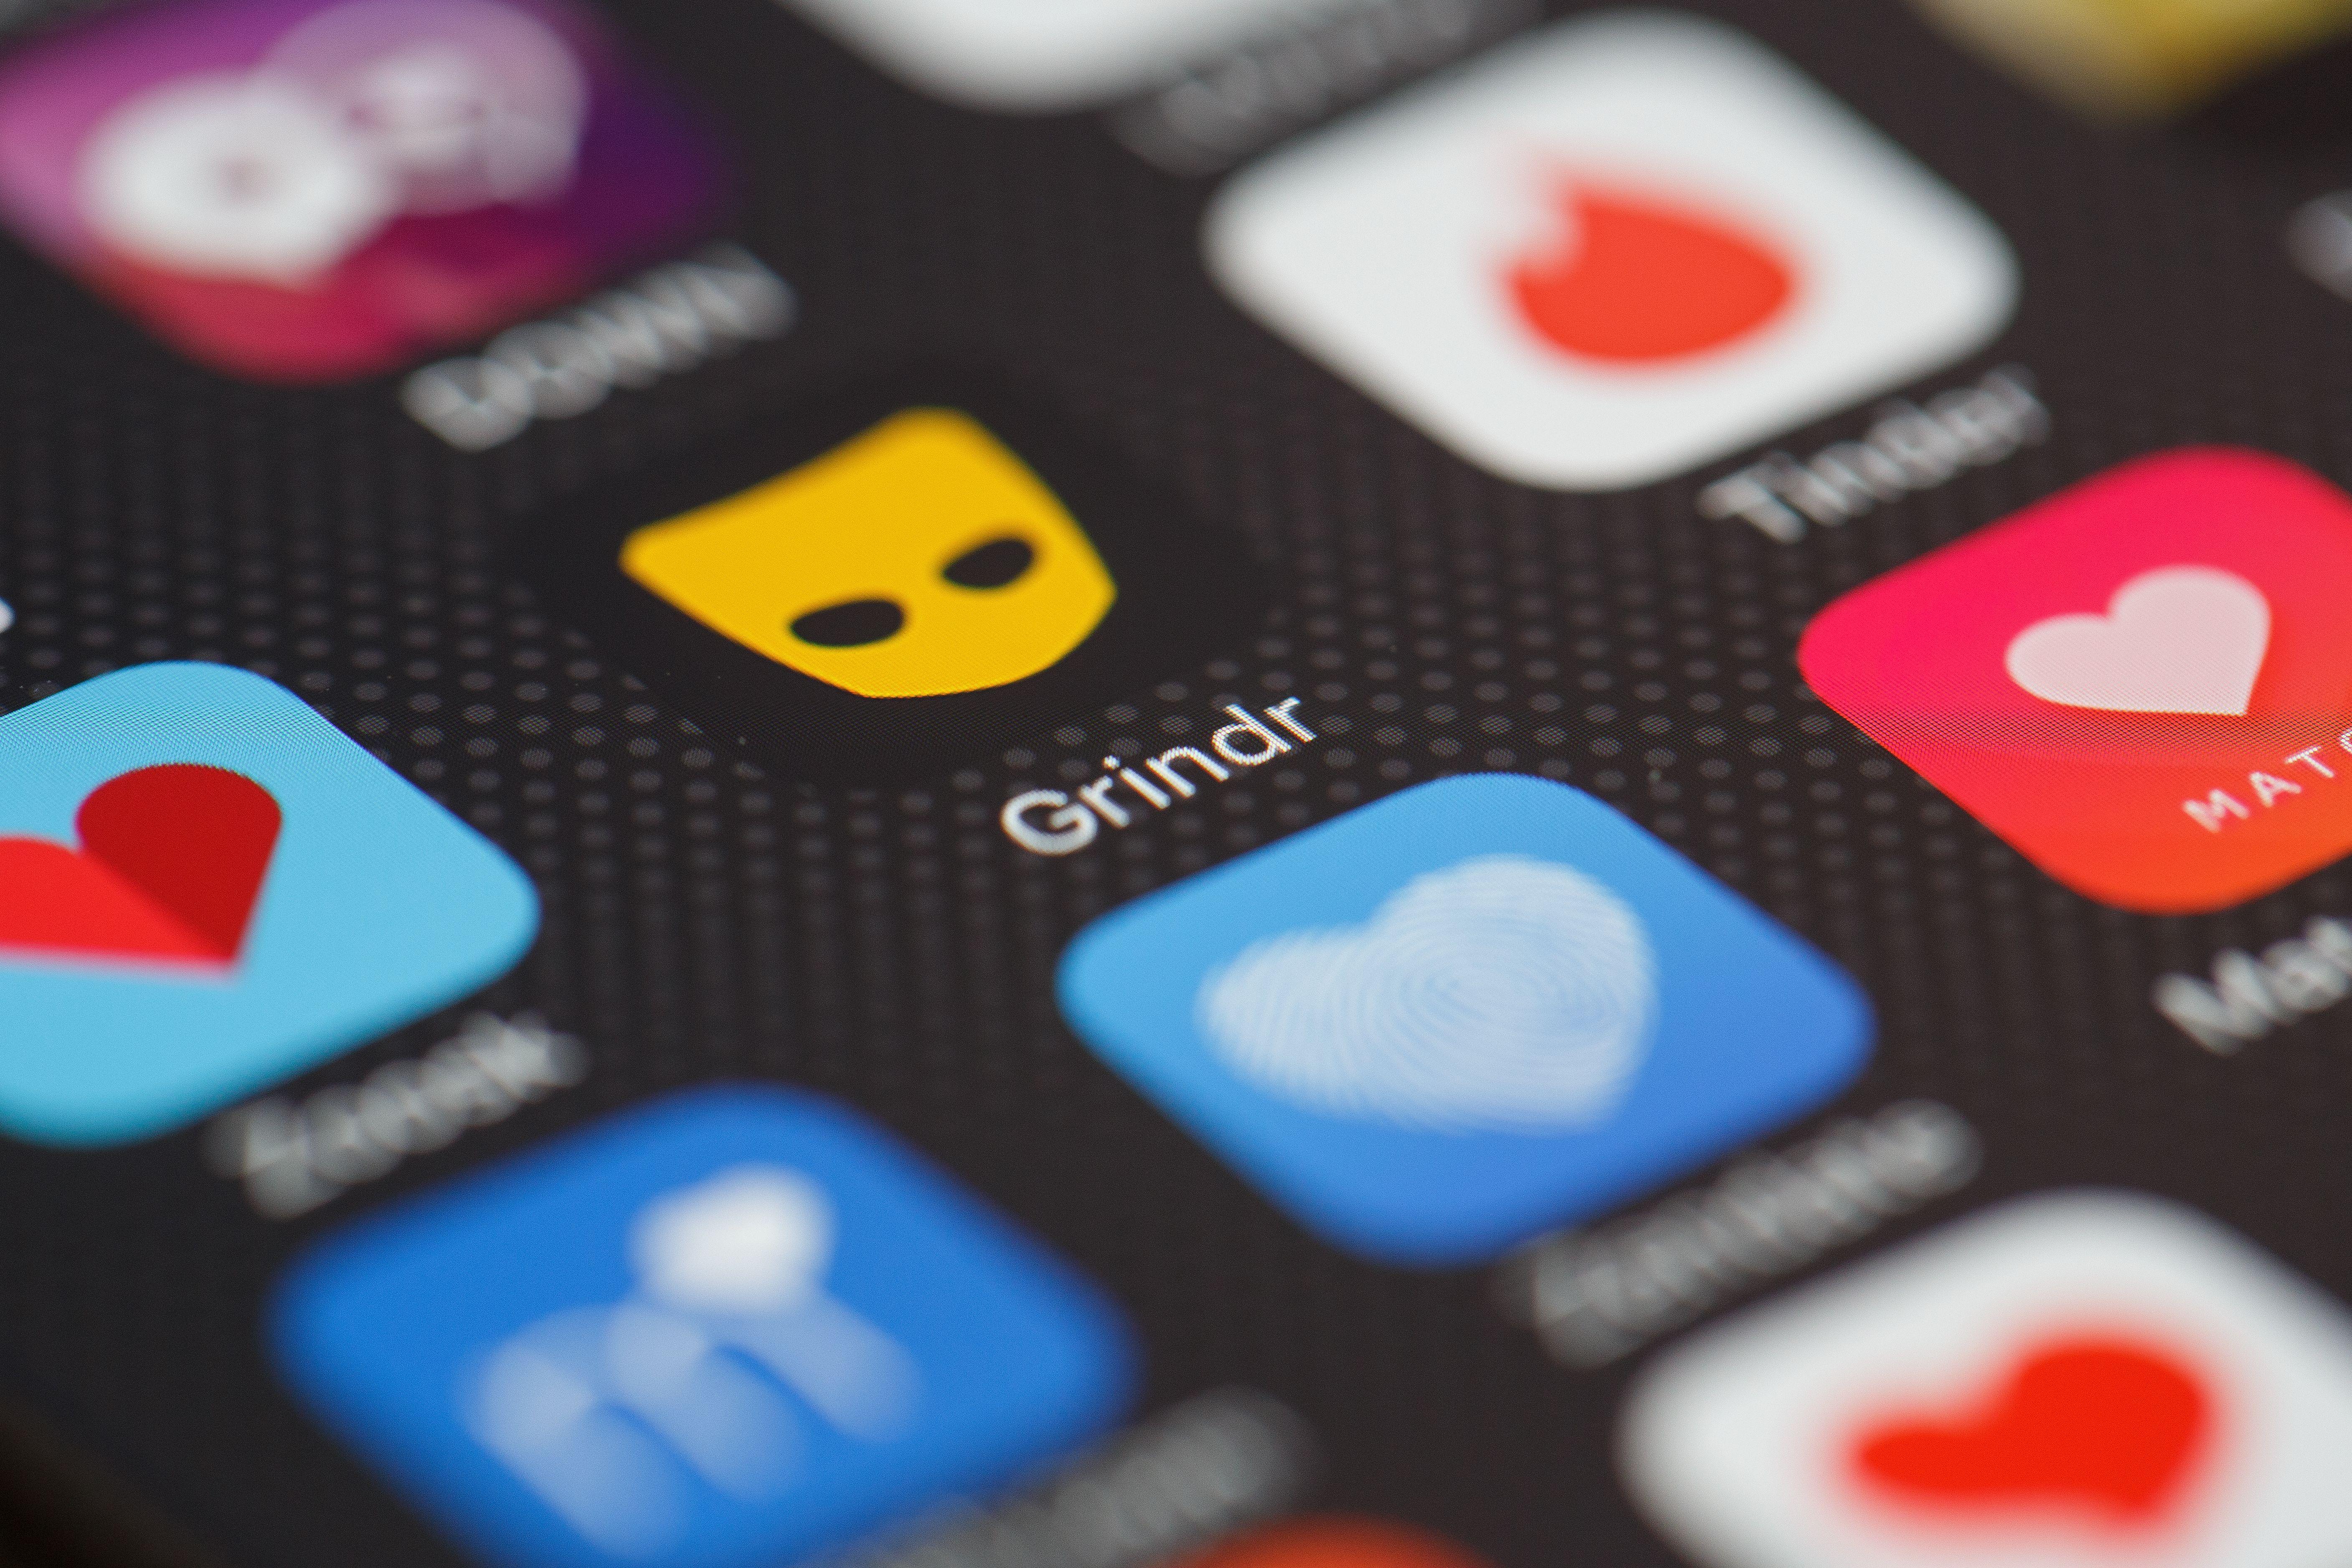 Gindr Logo - Grindr Admits to Sharing User HIV Status, Pledges to Stop | Fortune